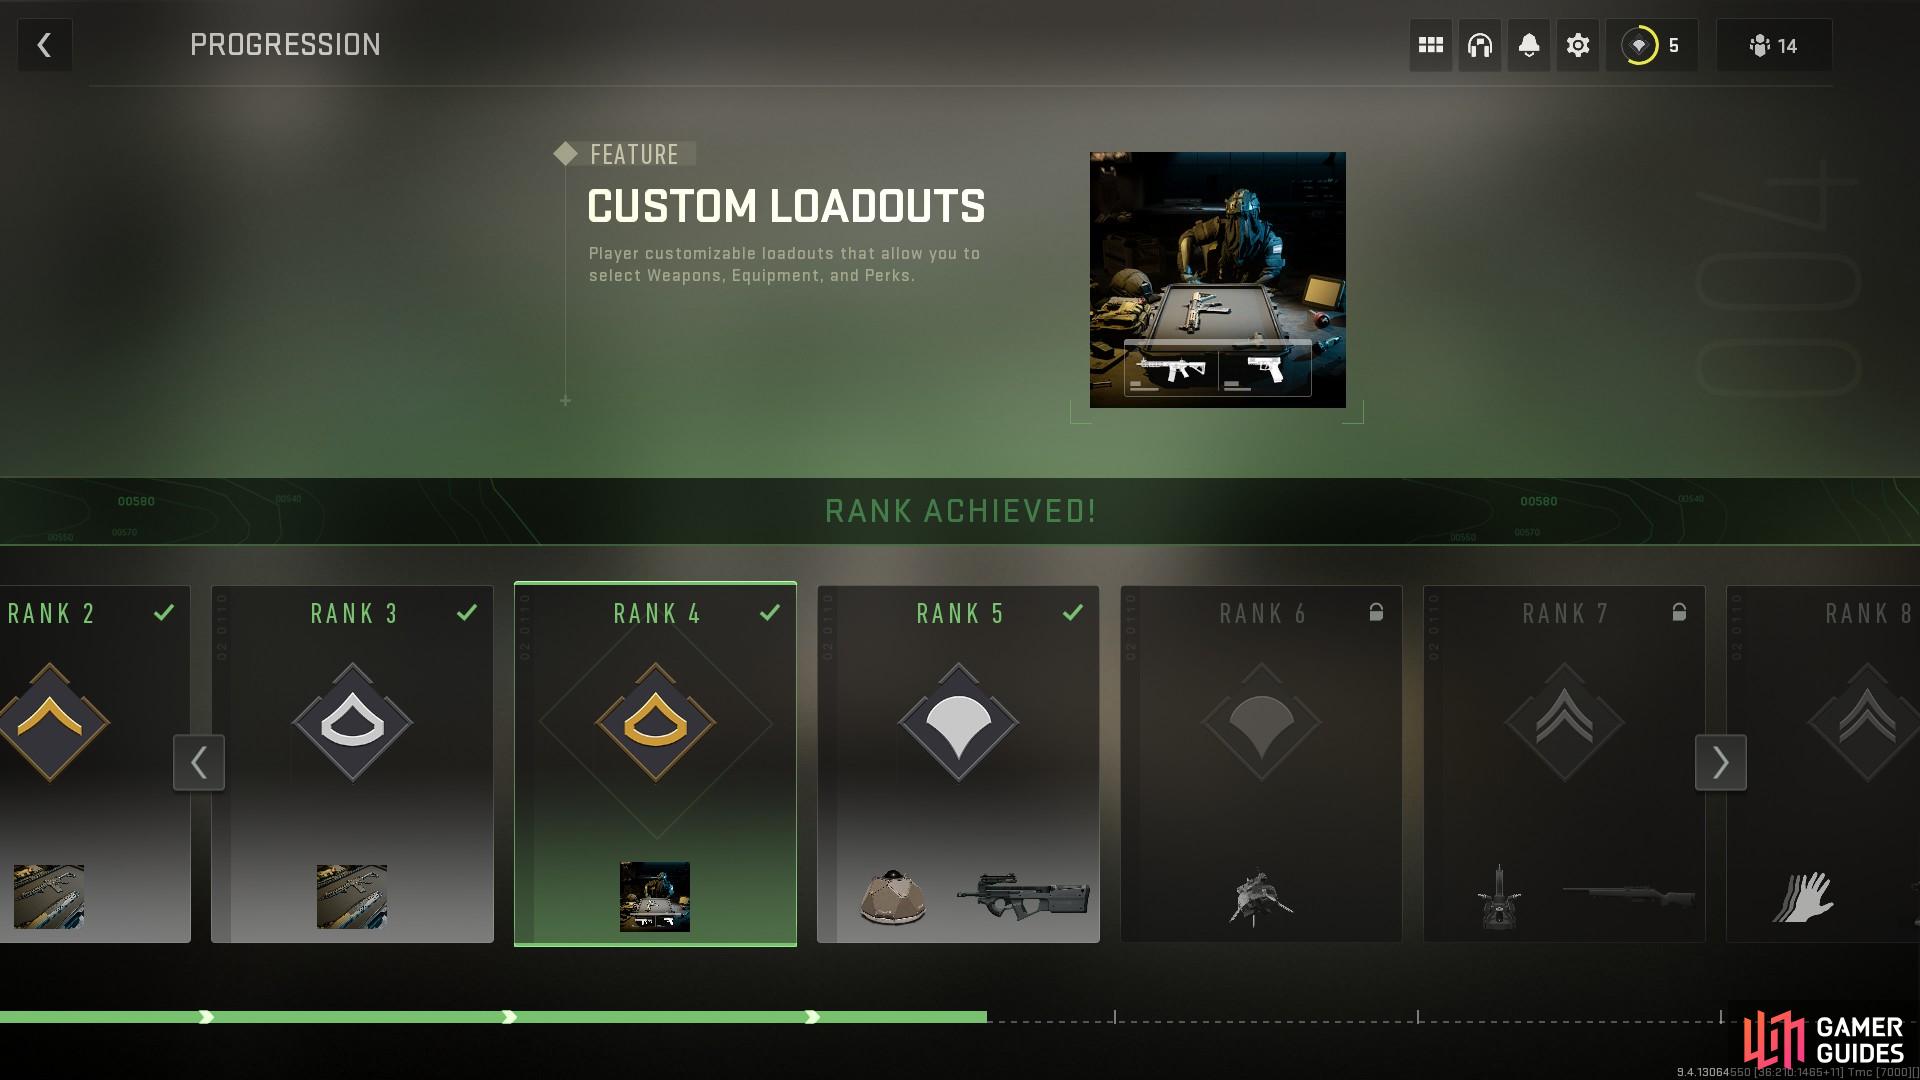 Here is a quick guide on how to create custom load-outs in MW2